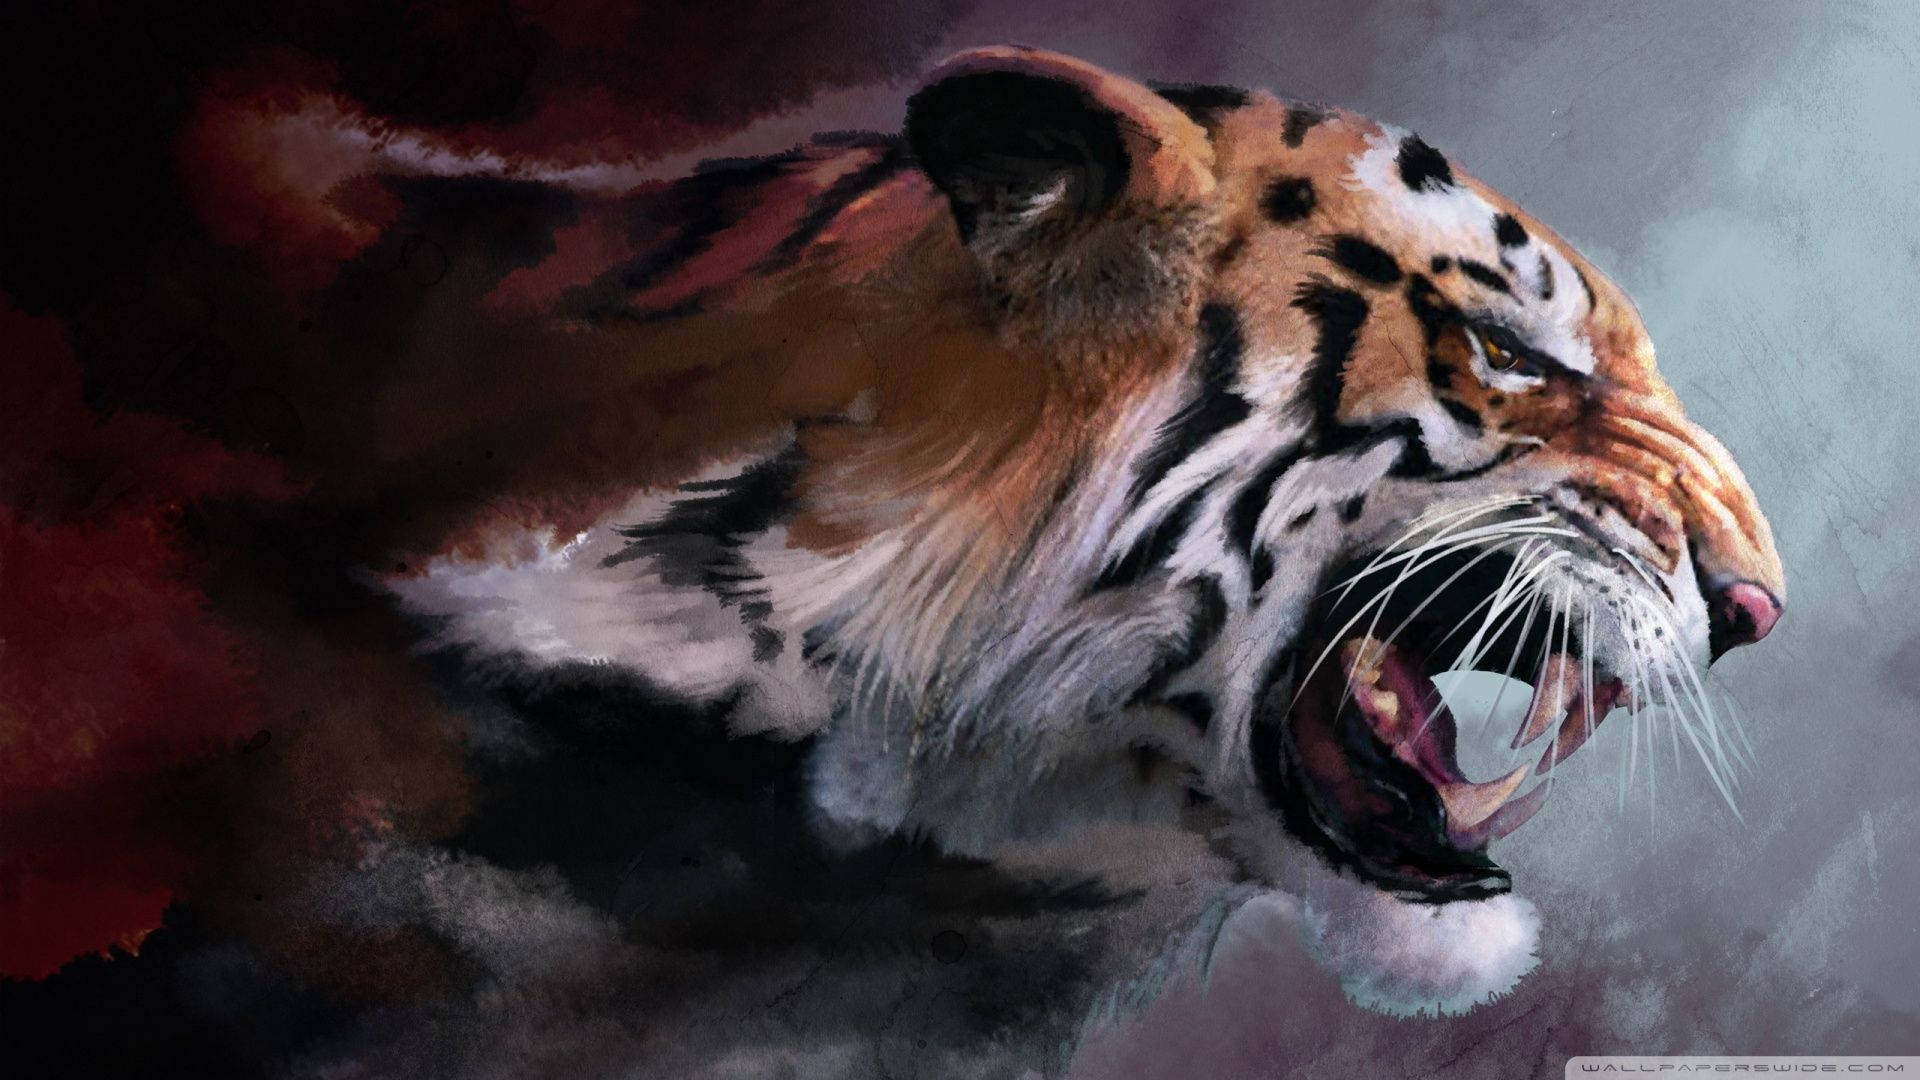 A powerful and regal portrait of a raging tiger. Wallpaper